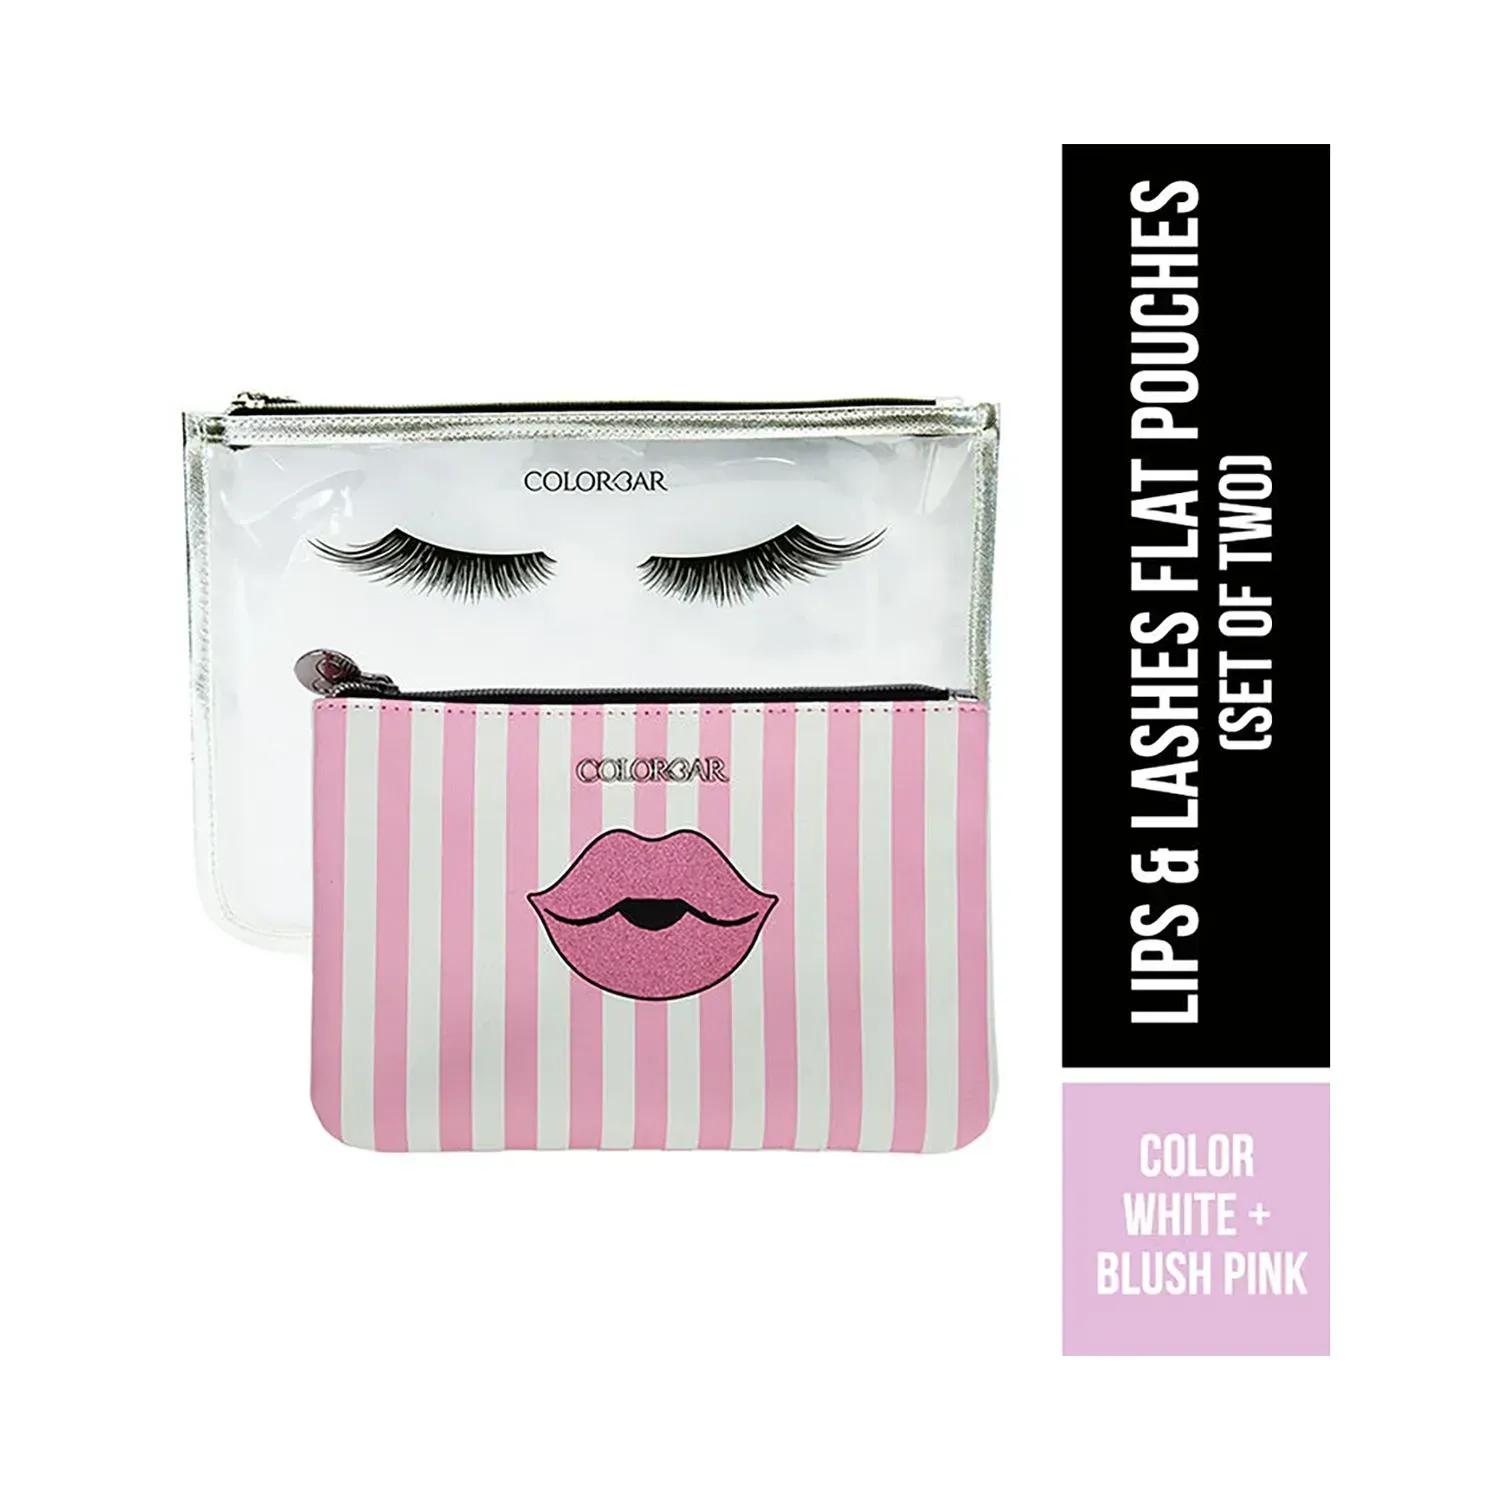 Colorbar | Colorbar Lips And Lashes Flat Pouches - White, Blush Pink (2 Pcs)